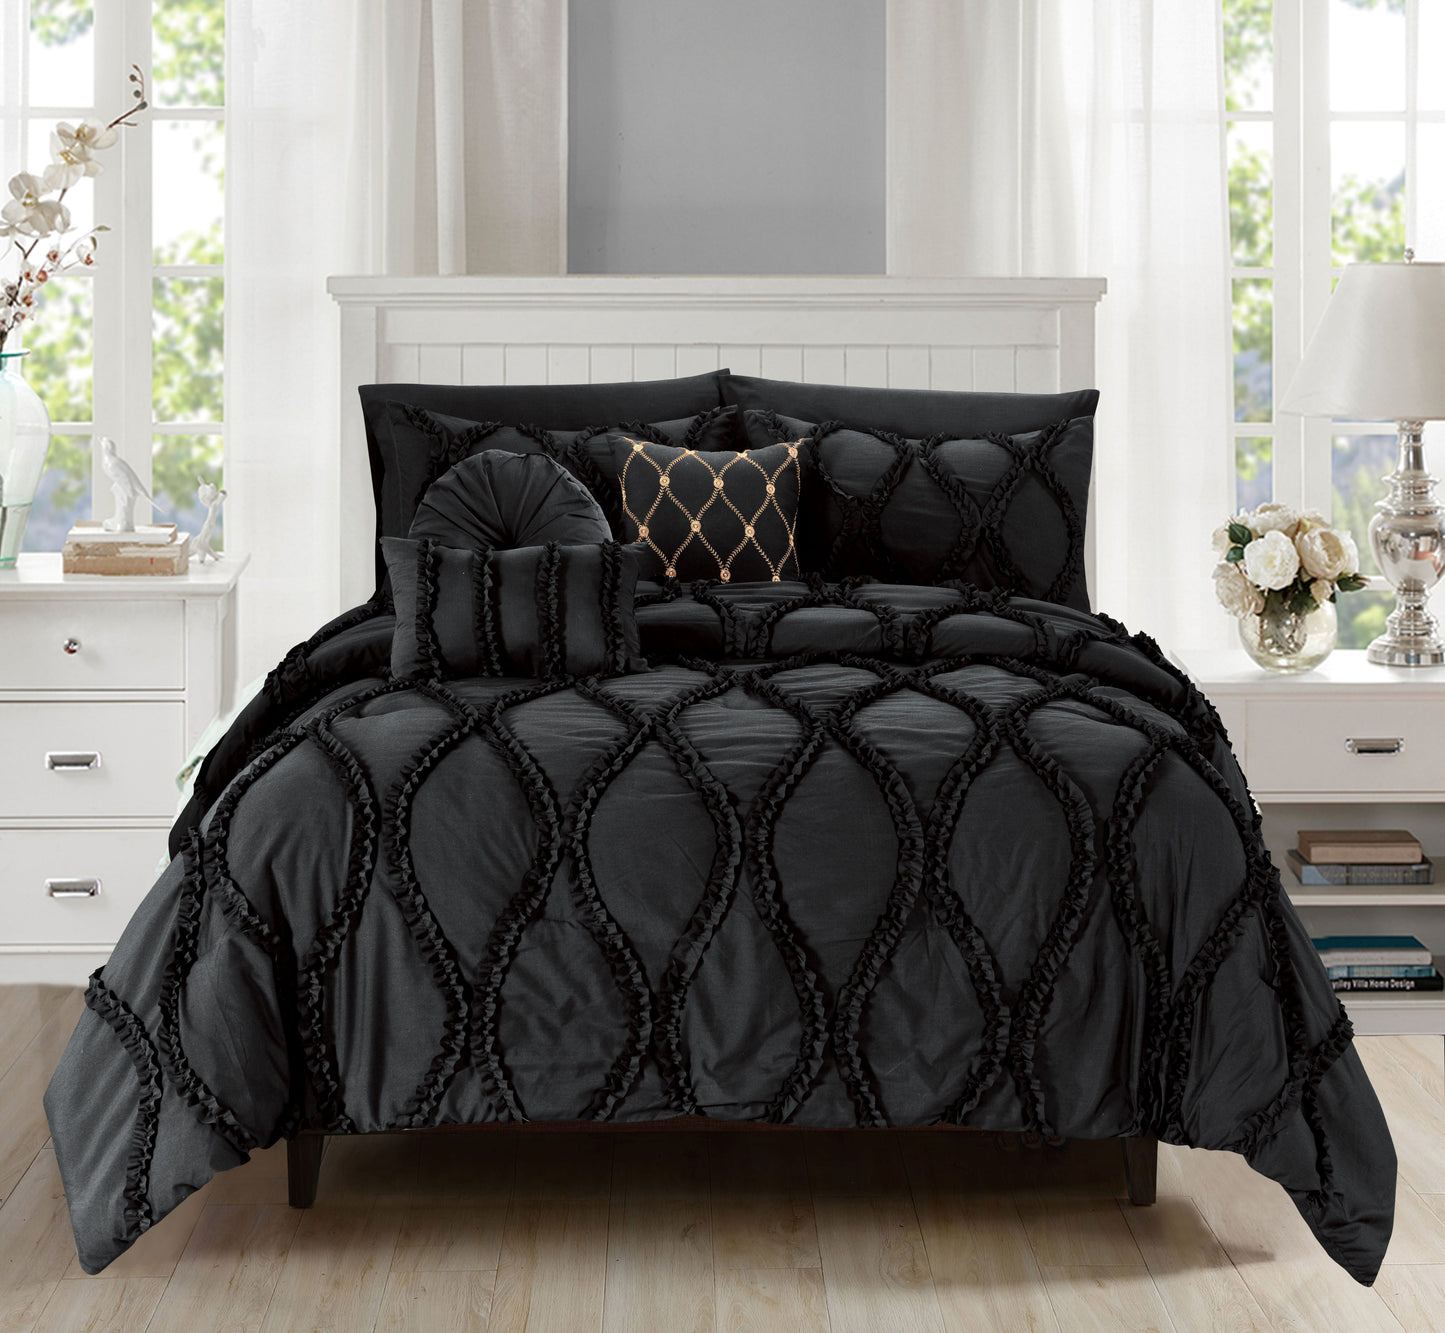 Elegant Comfort 10-Piece Infinity Design Comforter Set - Includes 4-Piece Sheet Set with Double Sided Storage Pockets